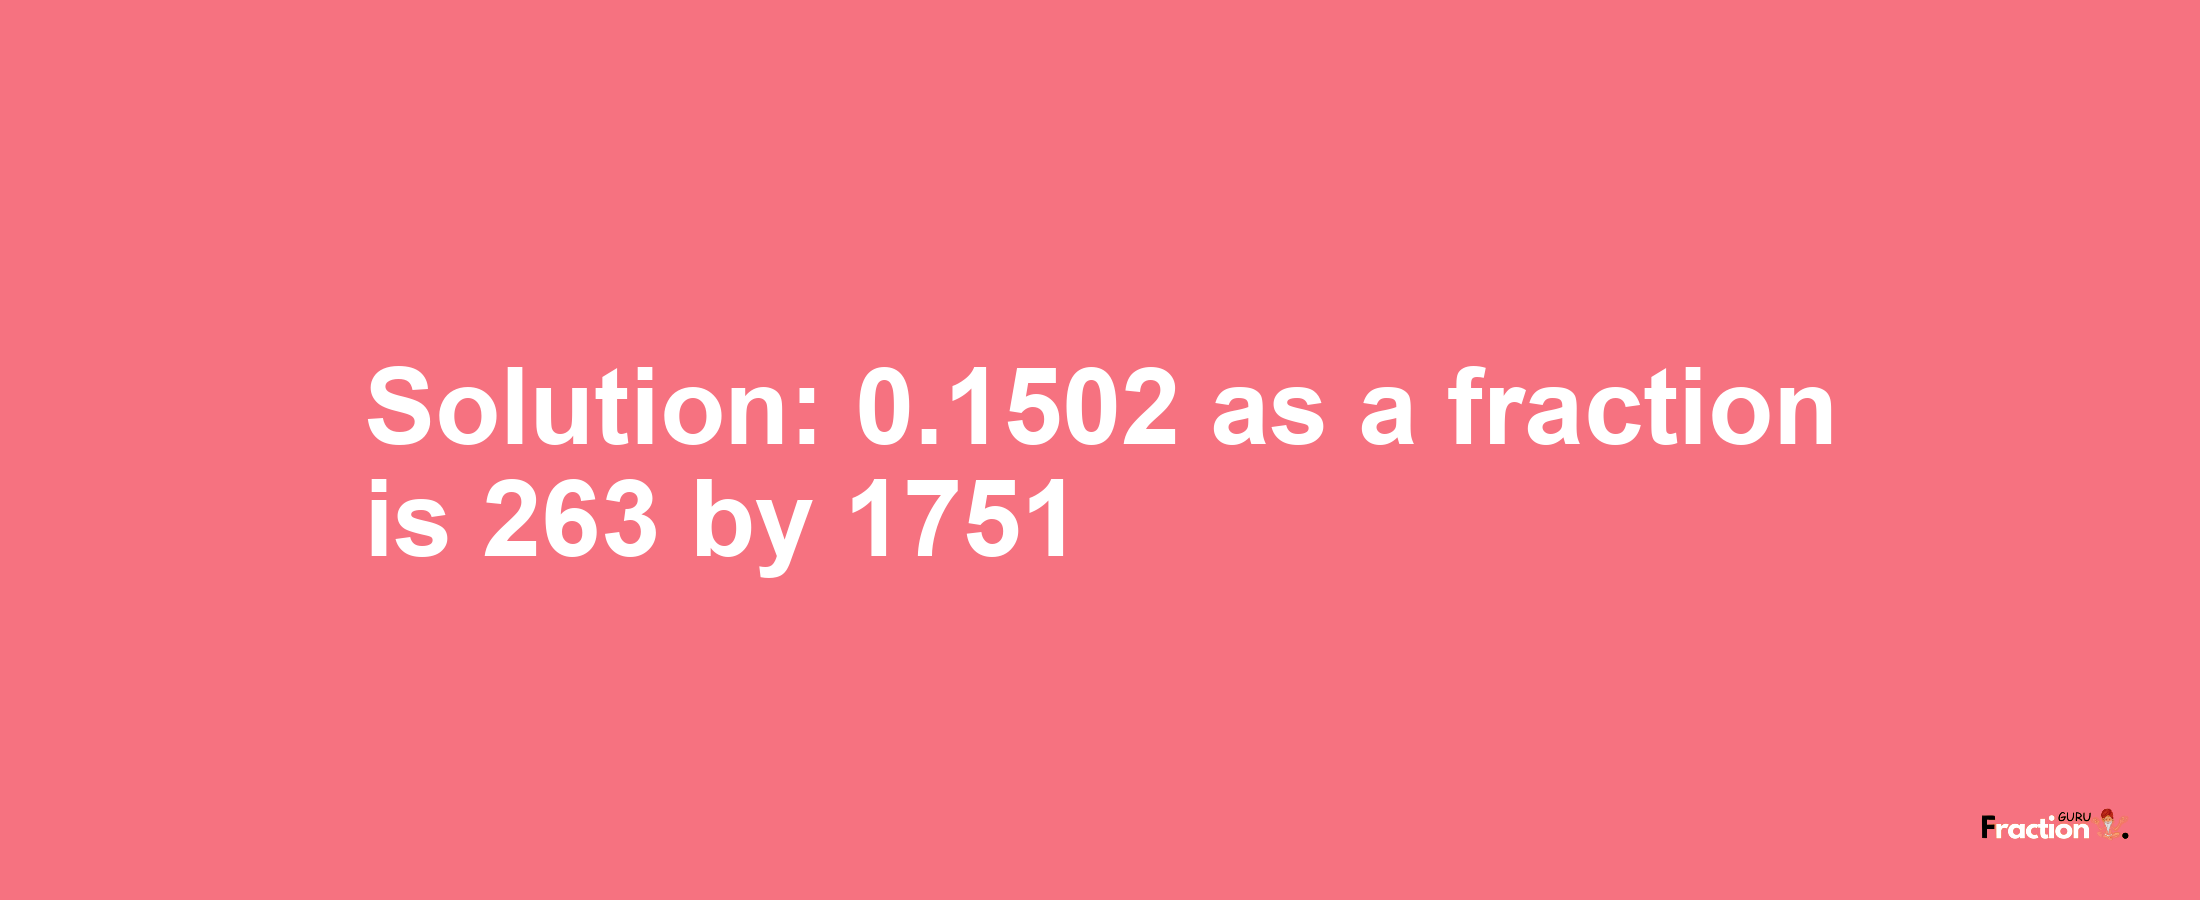 Solution:0.1502 as a fraction is 263/1751